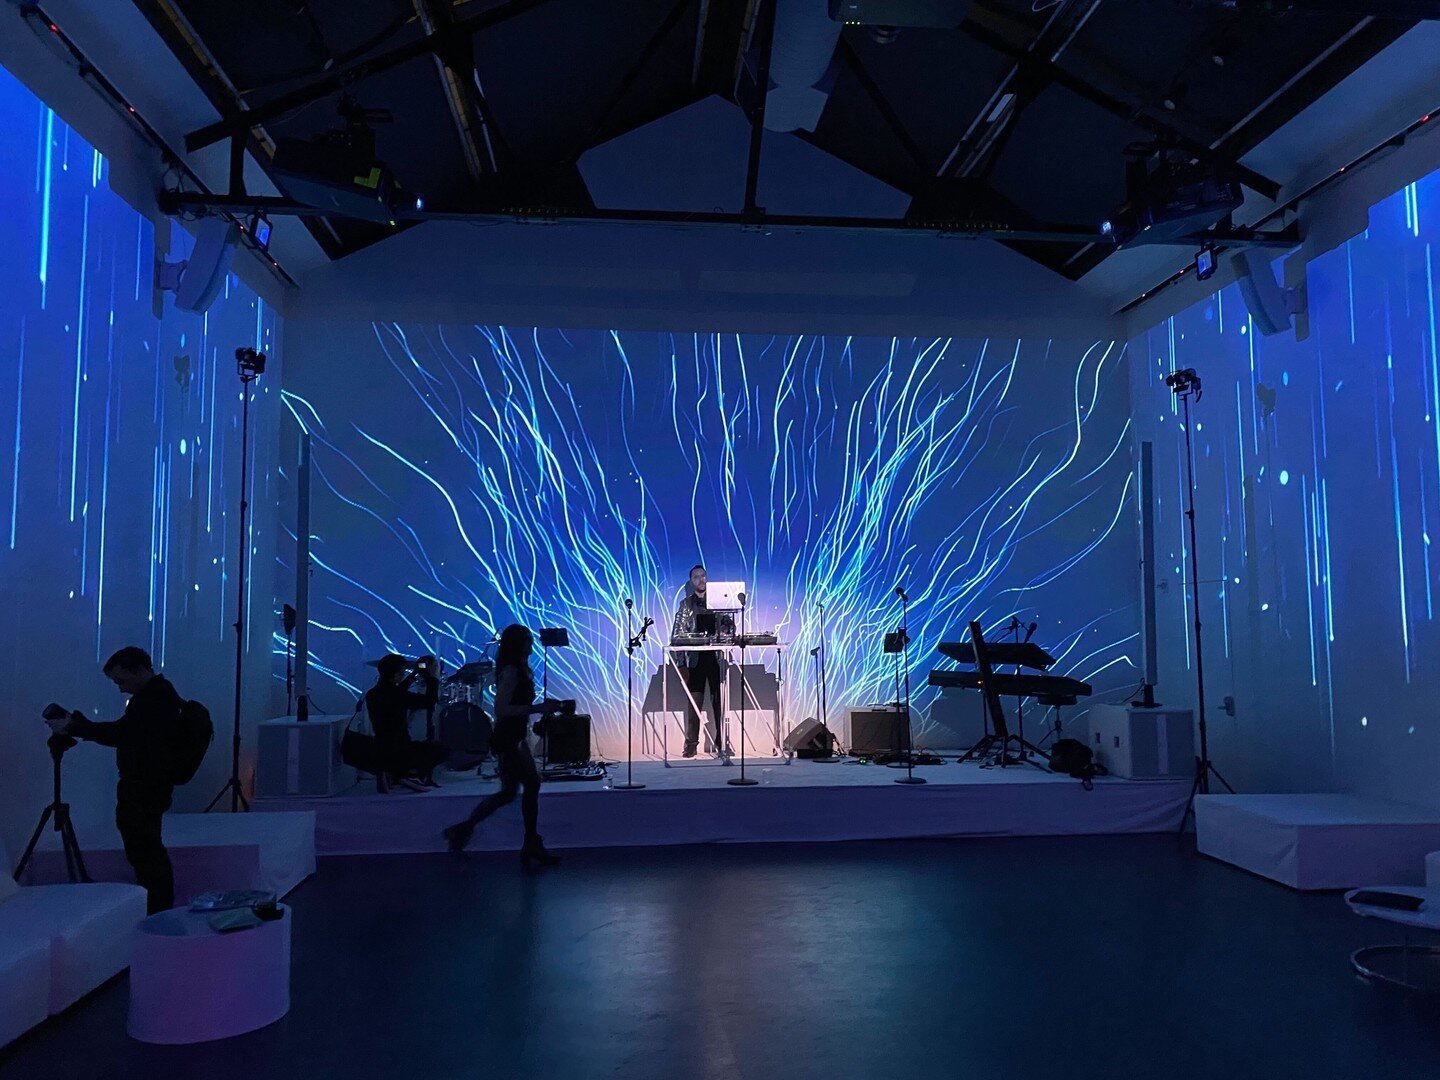 Our lighting experts infuse each event space with an immersive lighting design in order to create the perfect atmosphere for your guests. No matter what type of event you're hosting, contact the lighting professionals at Wizard Studios today!⁠
.⁠
.⁠
